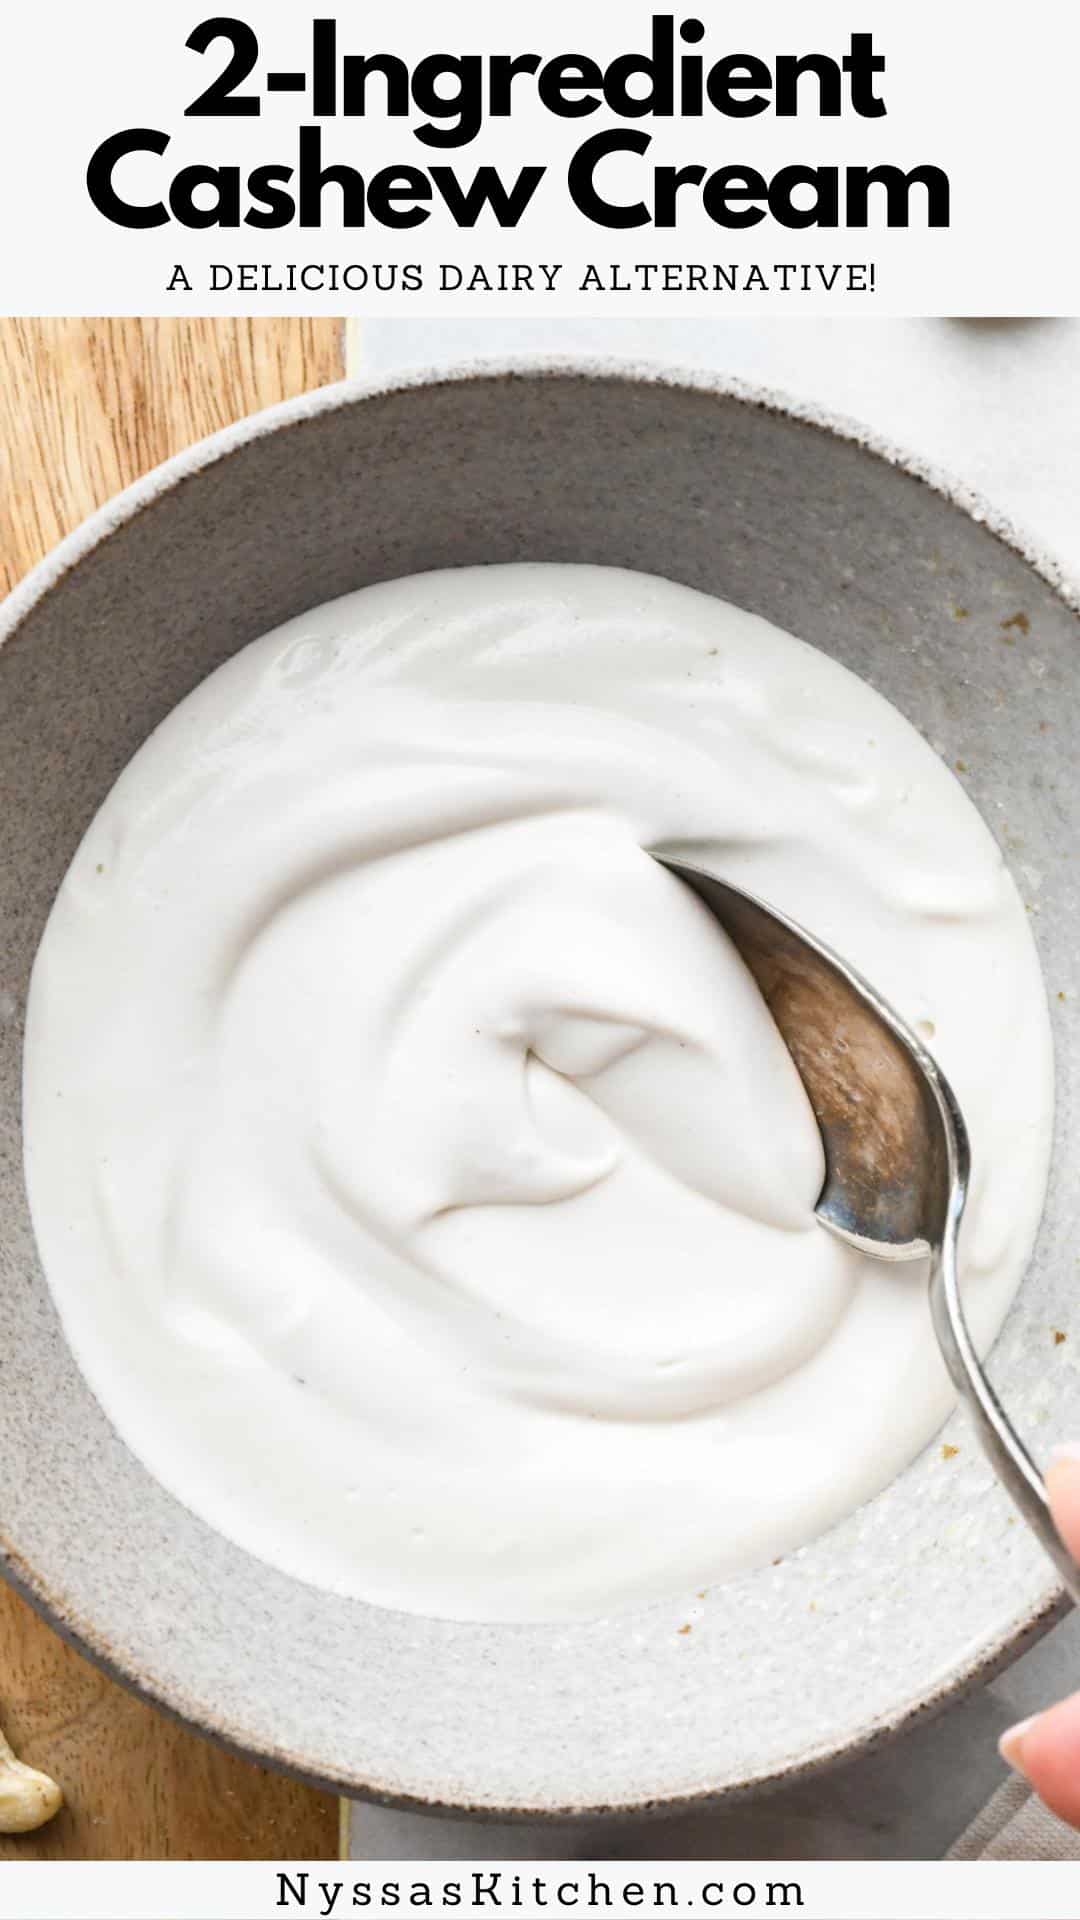 Cashew cream is a luscious dairy free wonder that can be used to replace heavy cream in savory to sweet recipes alike. Made with just water and raw cashews, it's quick and easy to whip up. It will transform the way you look at dairy free / vegan cooking, and make your life easier and more delicious! Vegan, Whole30 compatible, and paleo friendly.